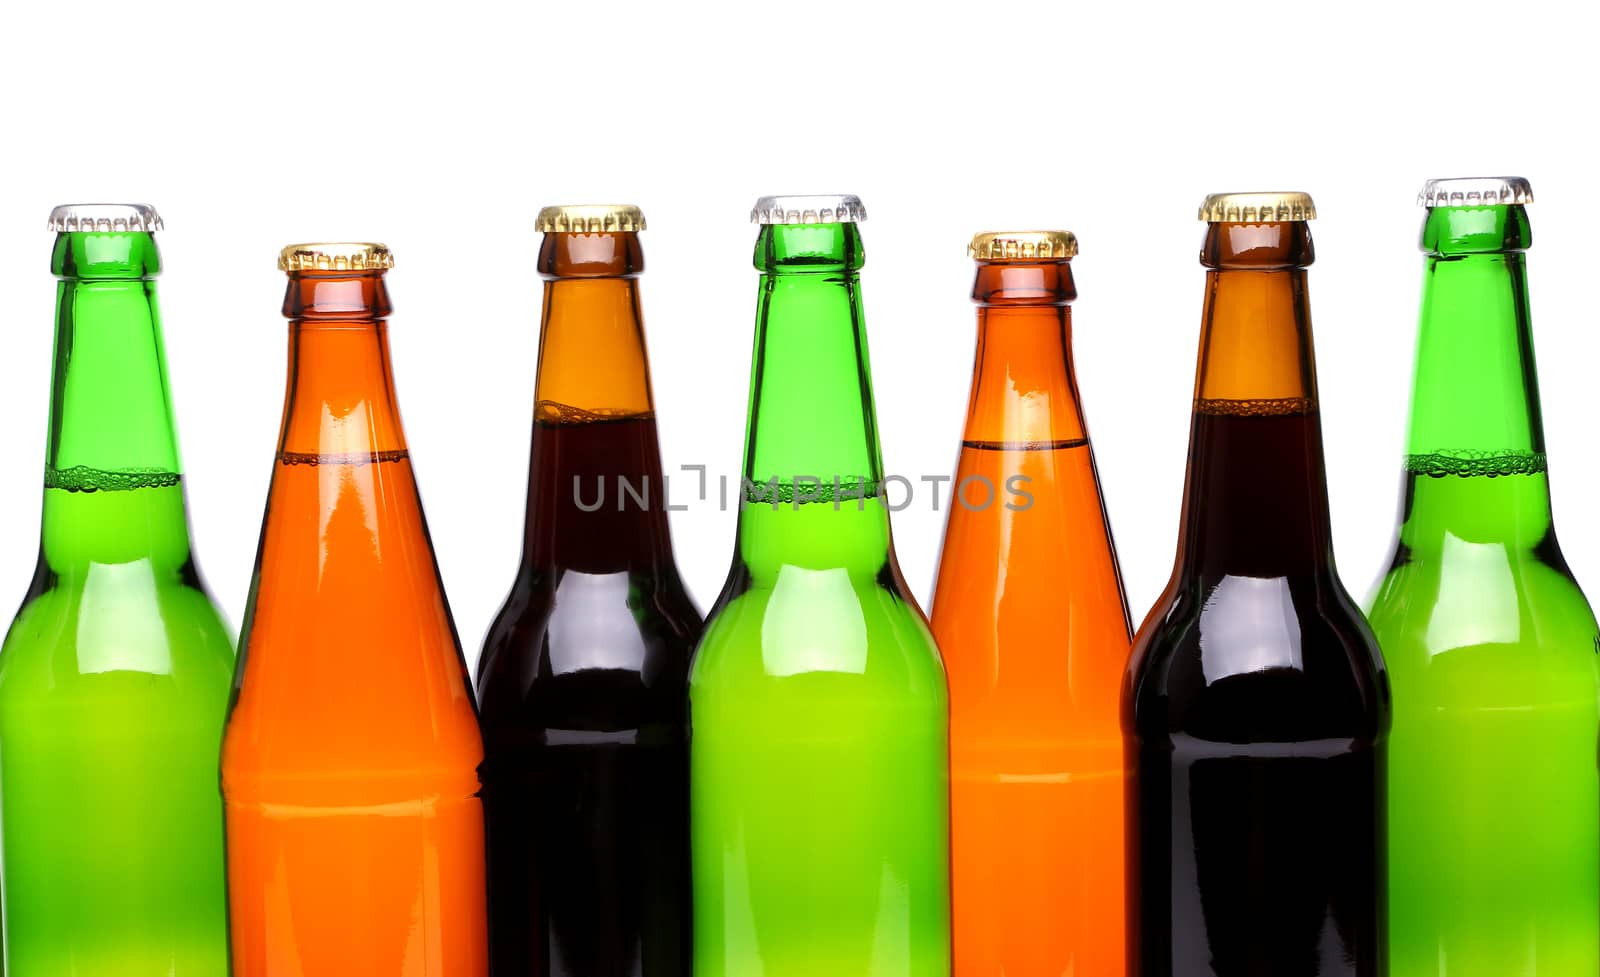 A row of top beer bottles on a white background with a reflection.